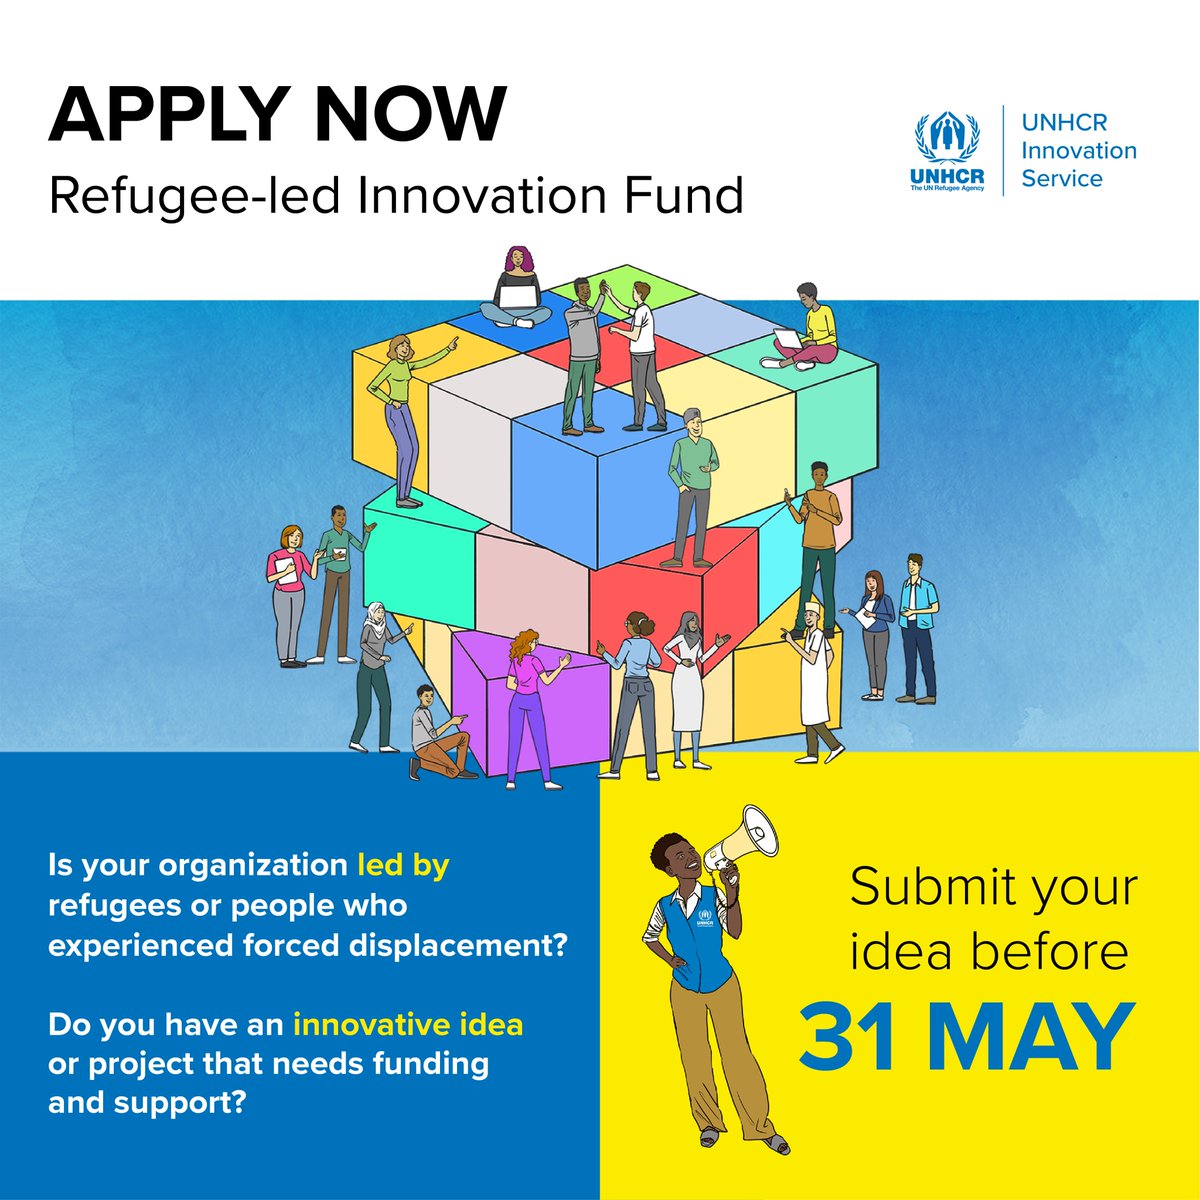 Calling all refugee-led organizations! We want to hear your forward-thinking ideas to bring lasting positive change ✨ Apply now to UNHCR’s Refugee-led Innovation Fund: bit.ly/3QkHRey